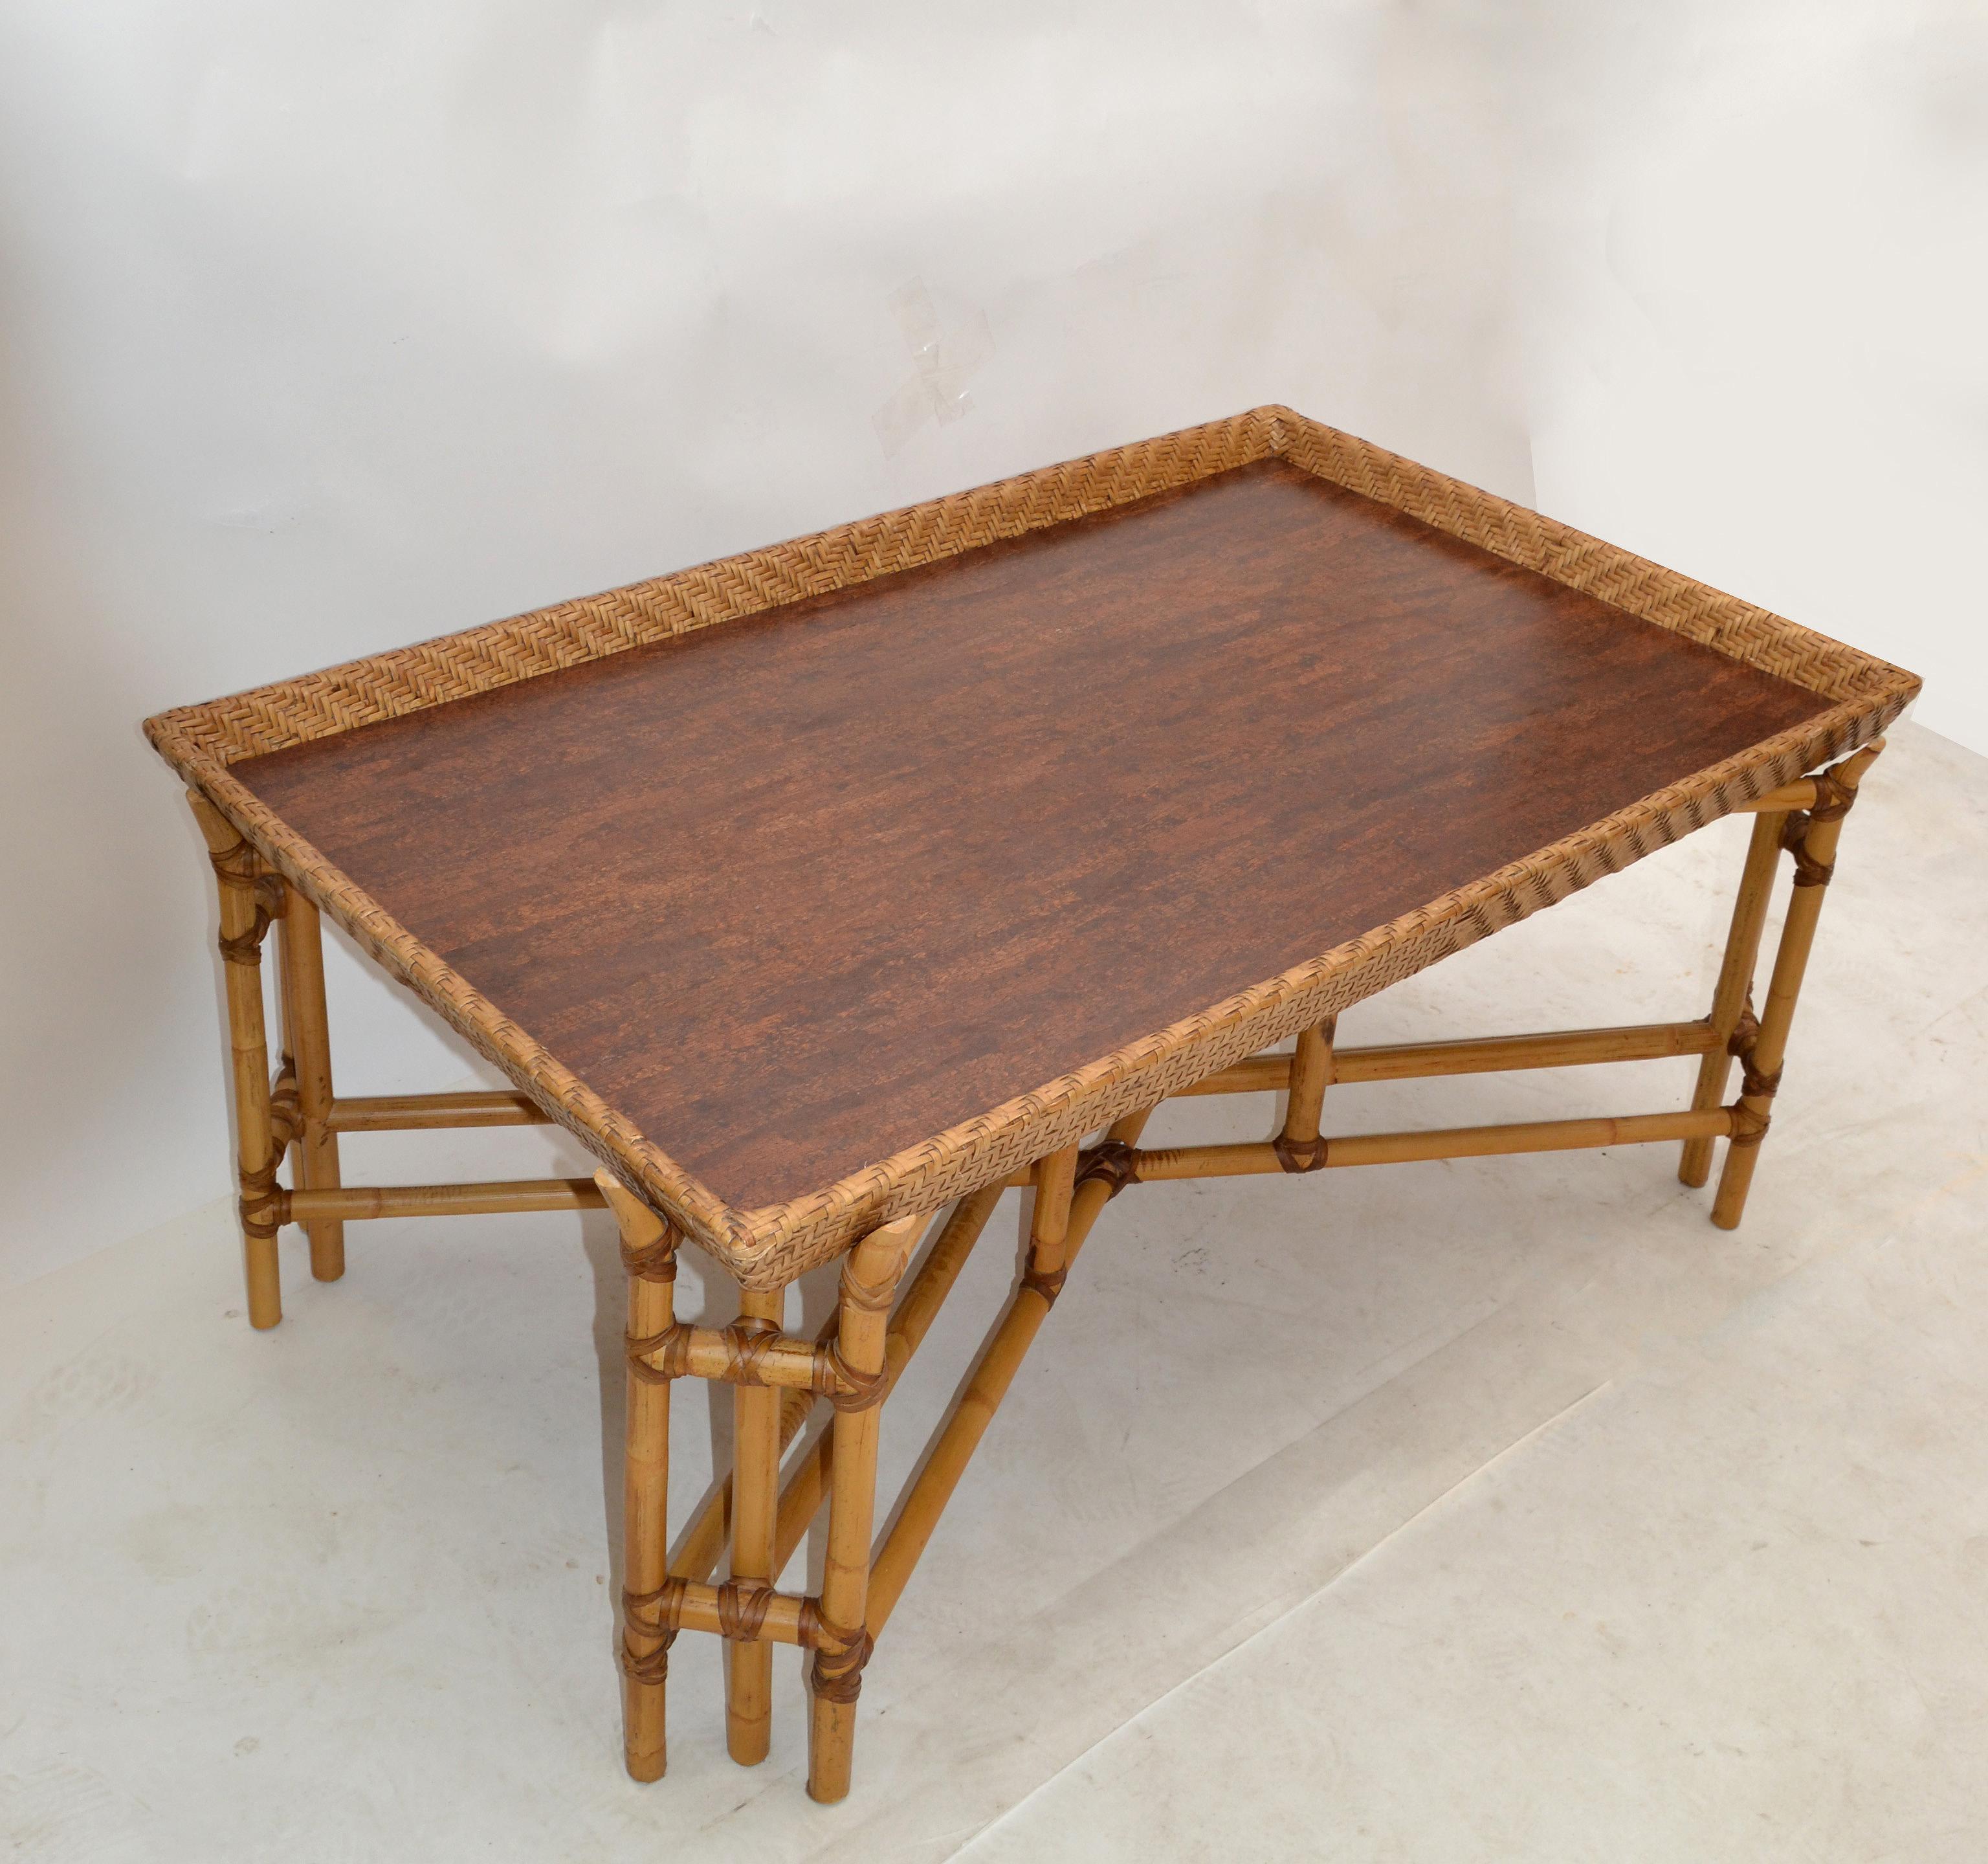 Hand-Woven McGuire Style Rectangular Bamboo Wood Mid-Century Modern Tray Table American 80s